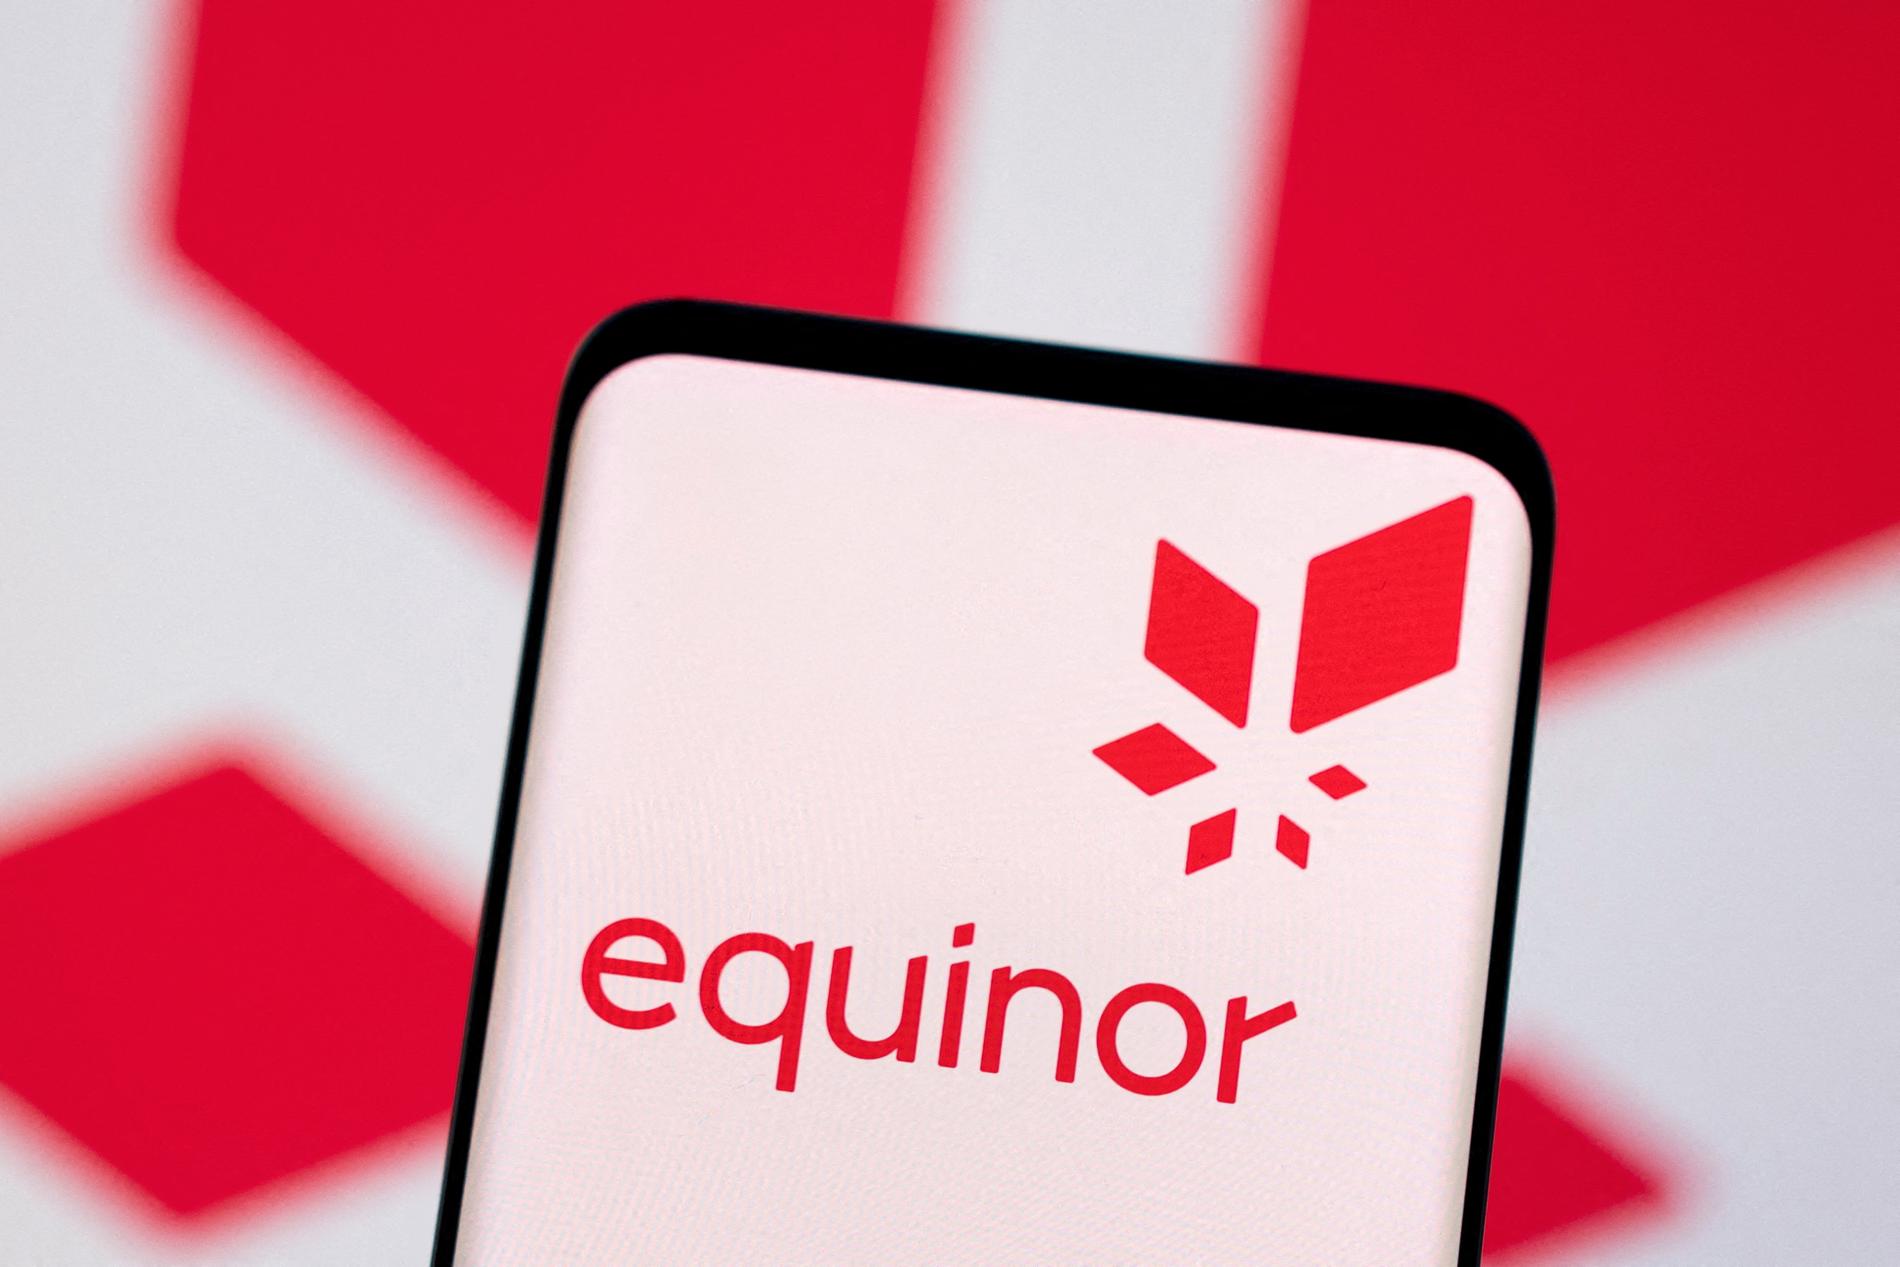 Oil money and the future of BiToro and Equinor